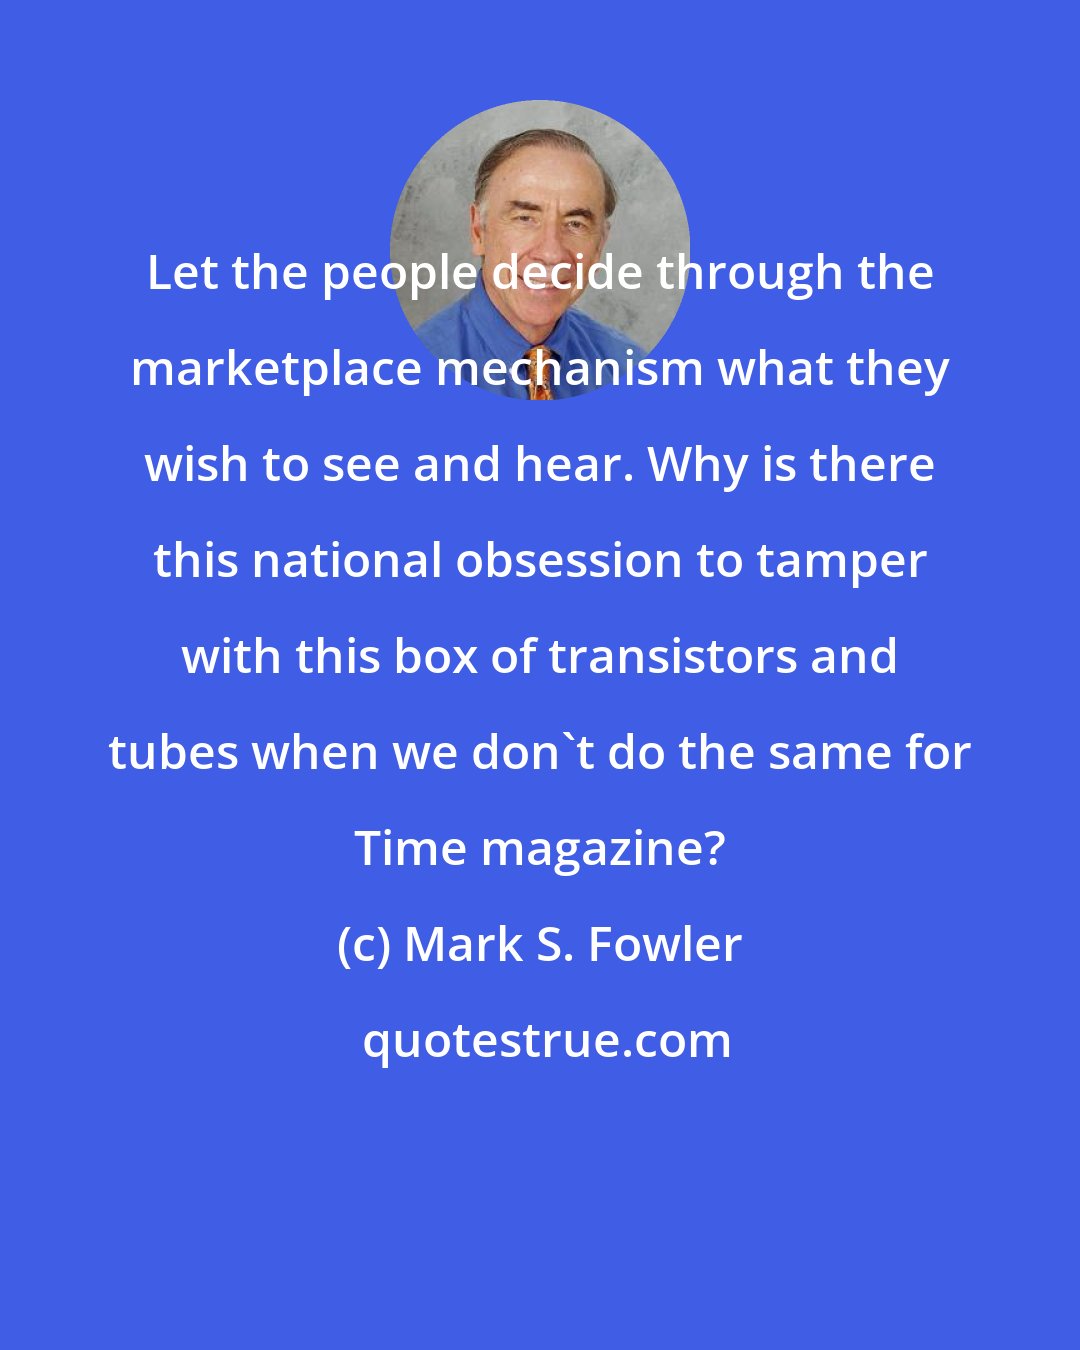 Mark S. Fowler: Let the people decide through the marketplace mechanism what they wish to see and hear. Why is there this national obsession to tamper with this box of transistors and tubes when we don't do the same for Time magazine?